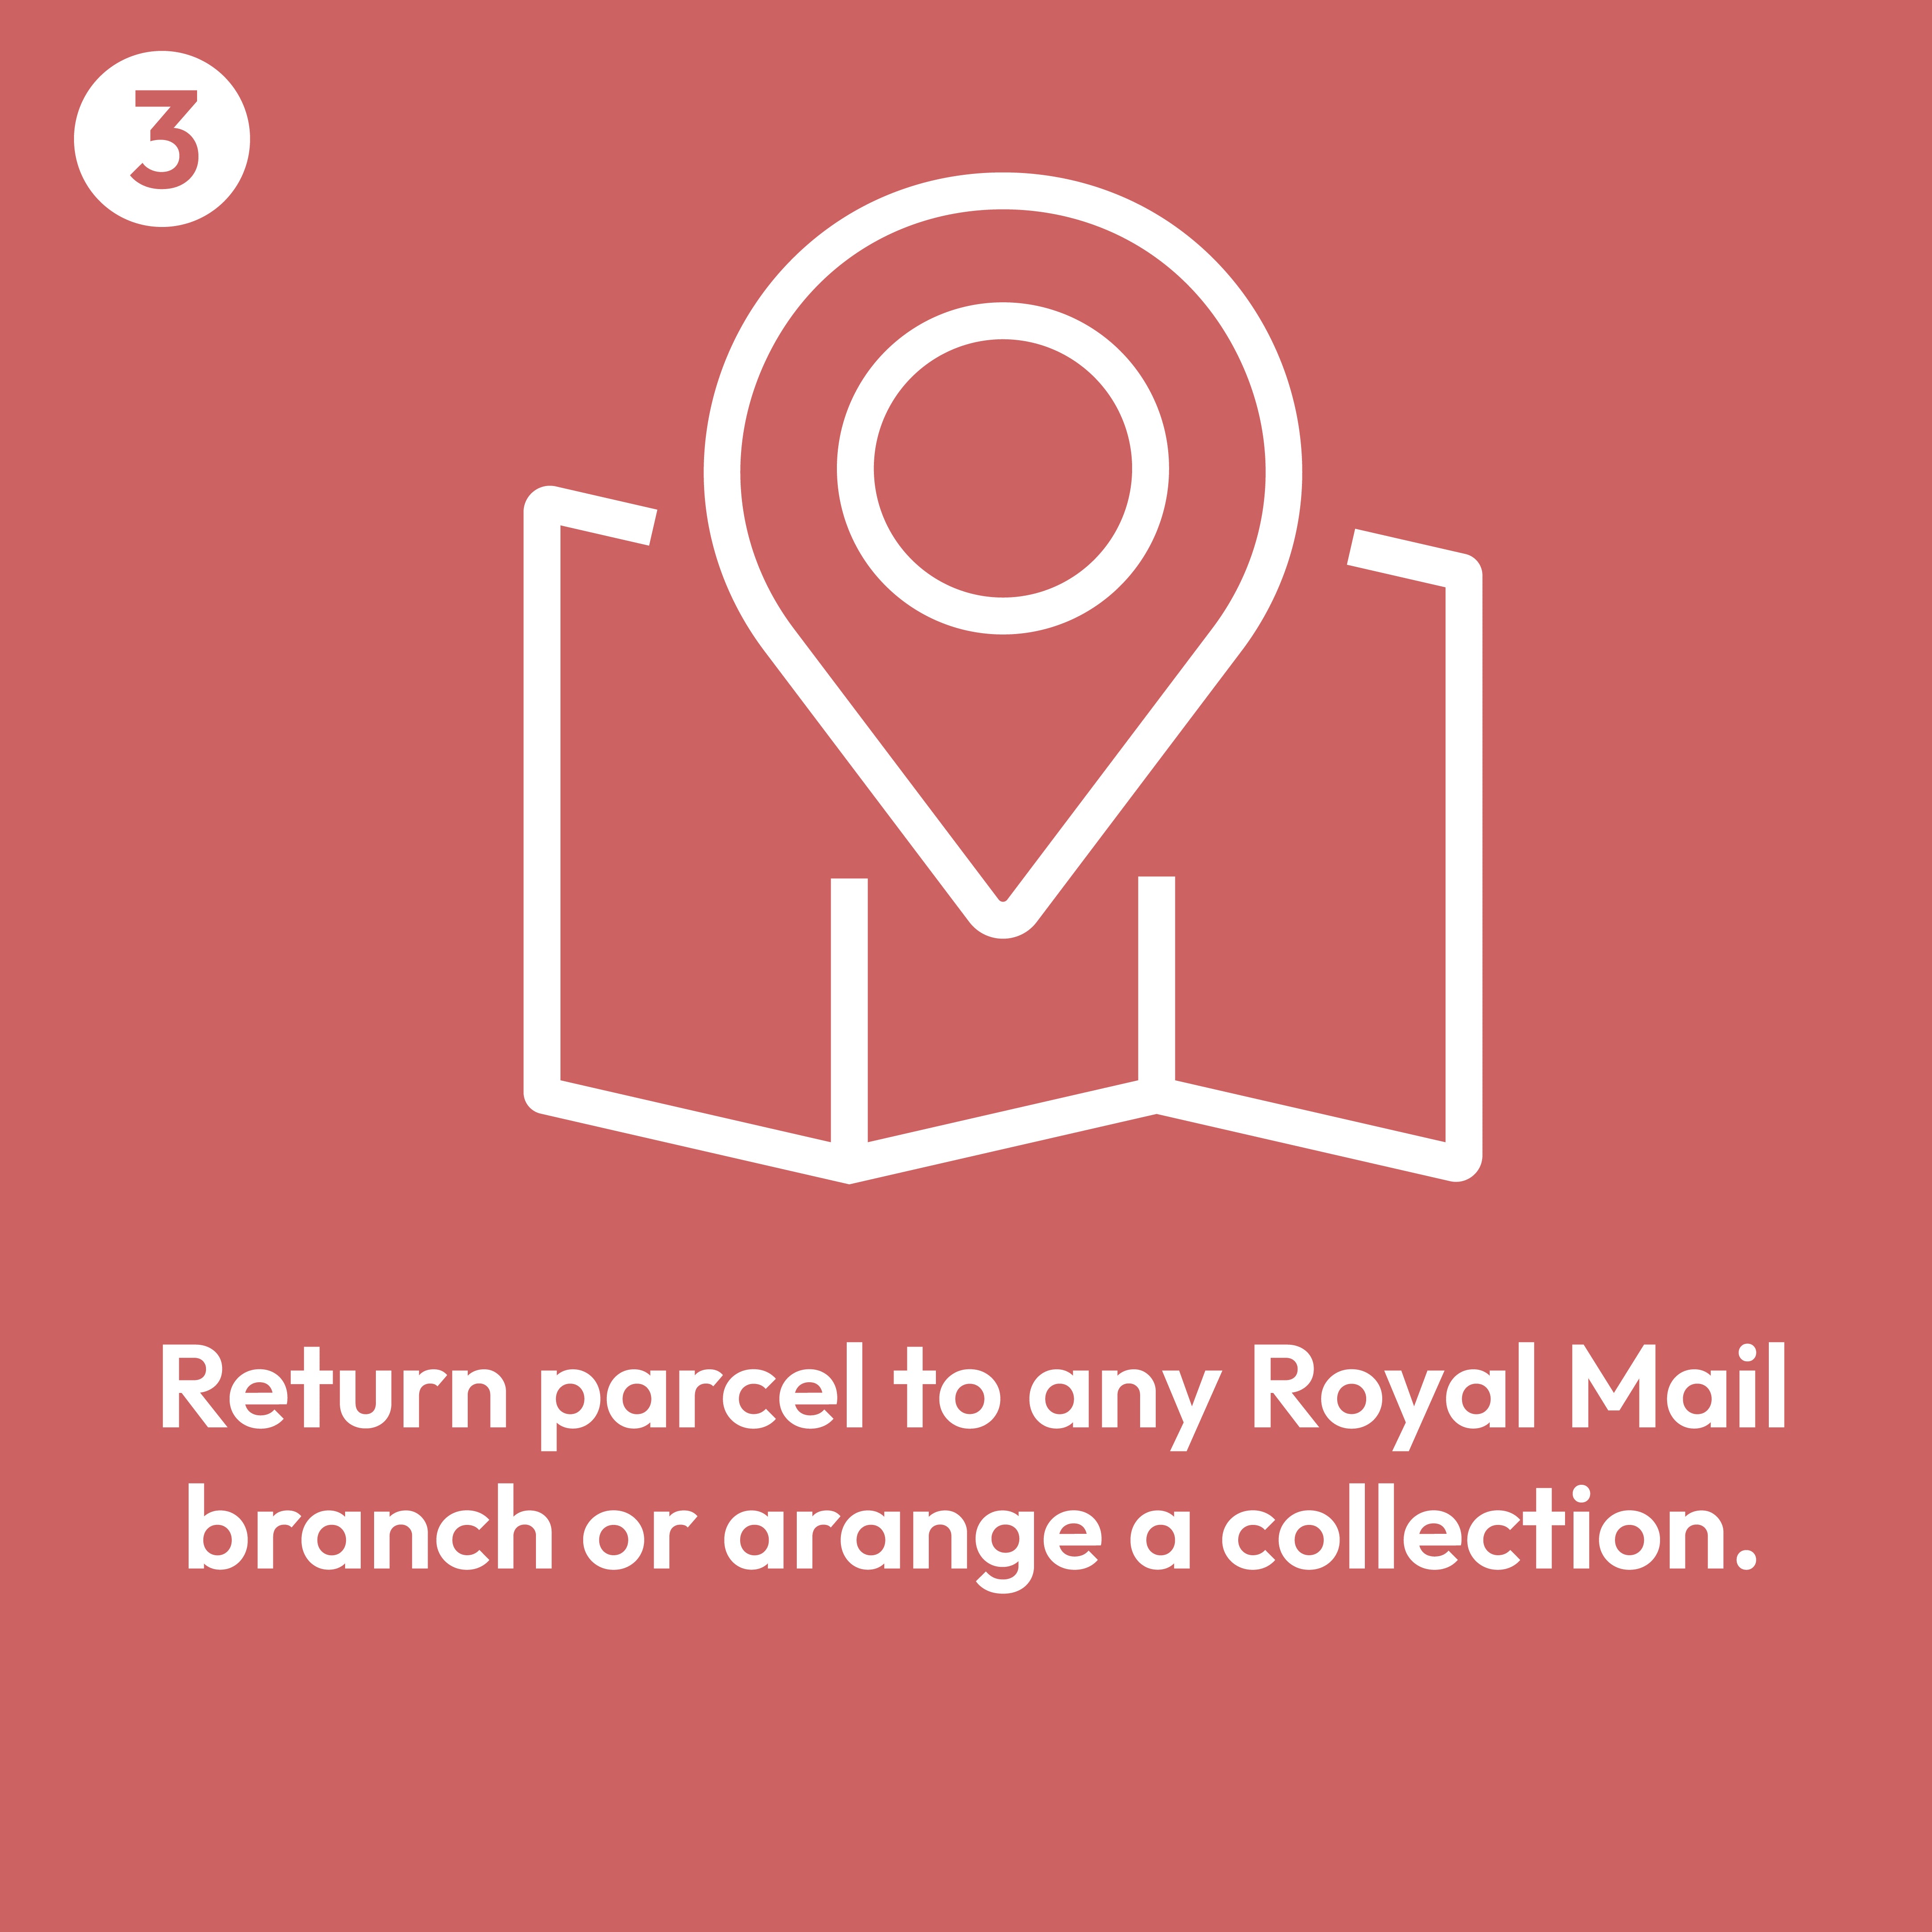 Return your parcel to any Royal Mail branch or arrange a collection